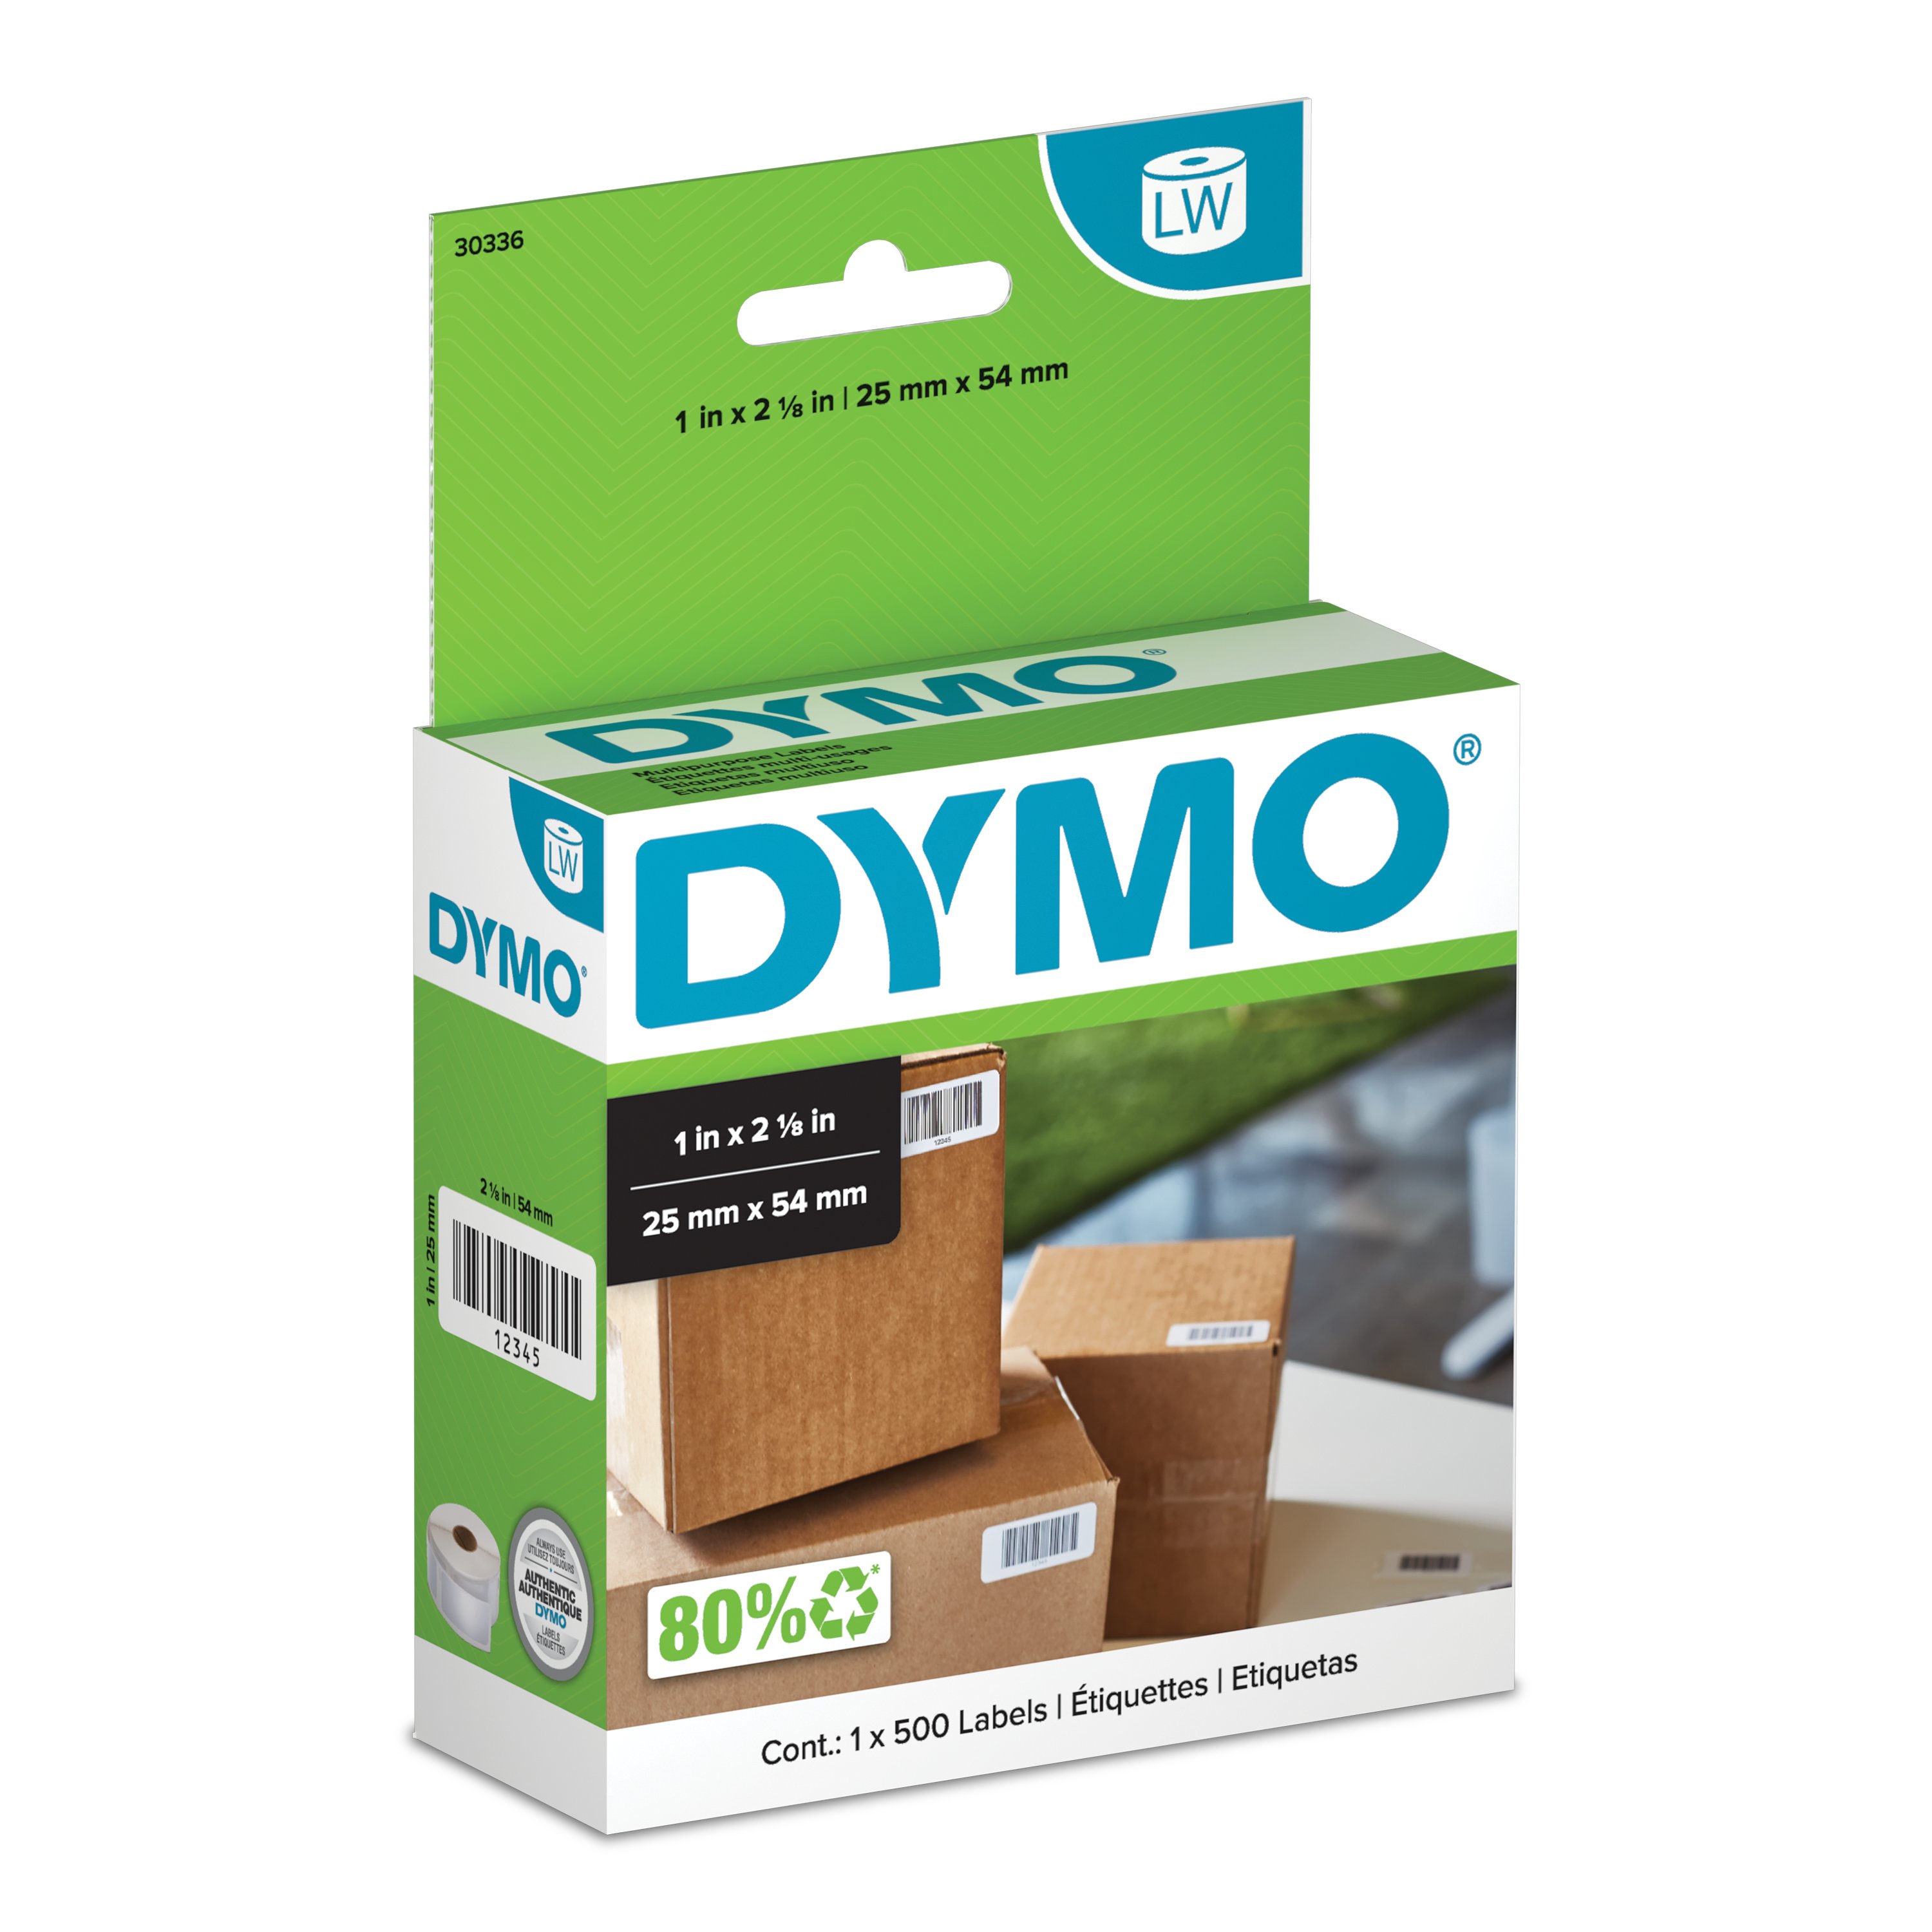 320 Dymo 1 Roll of 500 Labels 19x51mm for Dymo LabelWriter 310 450 400 SE450 712395248164 4XL 